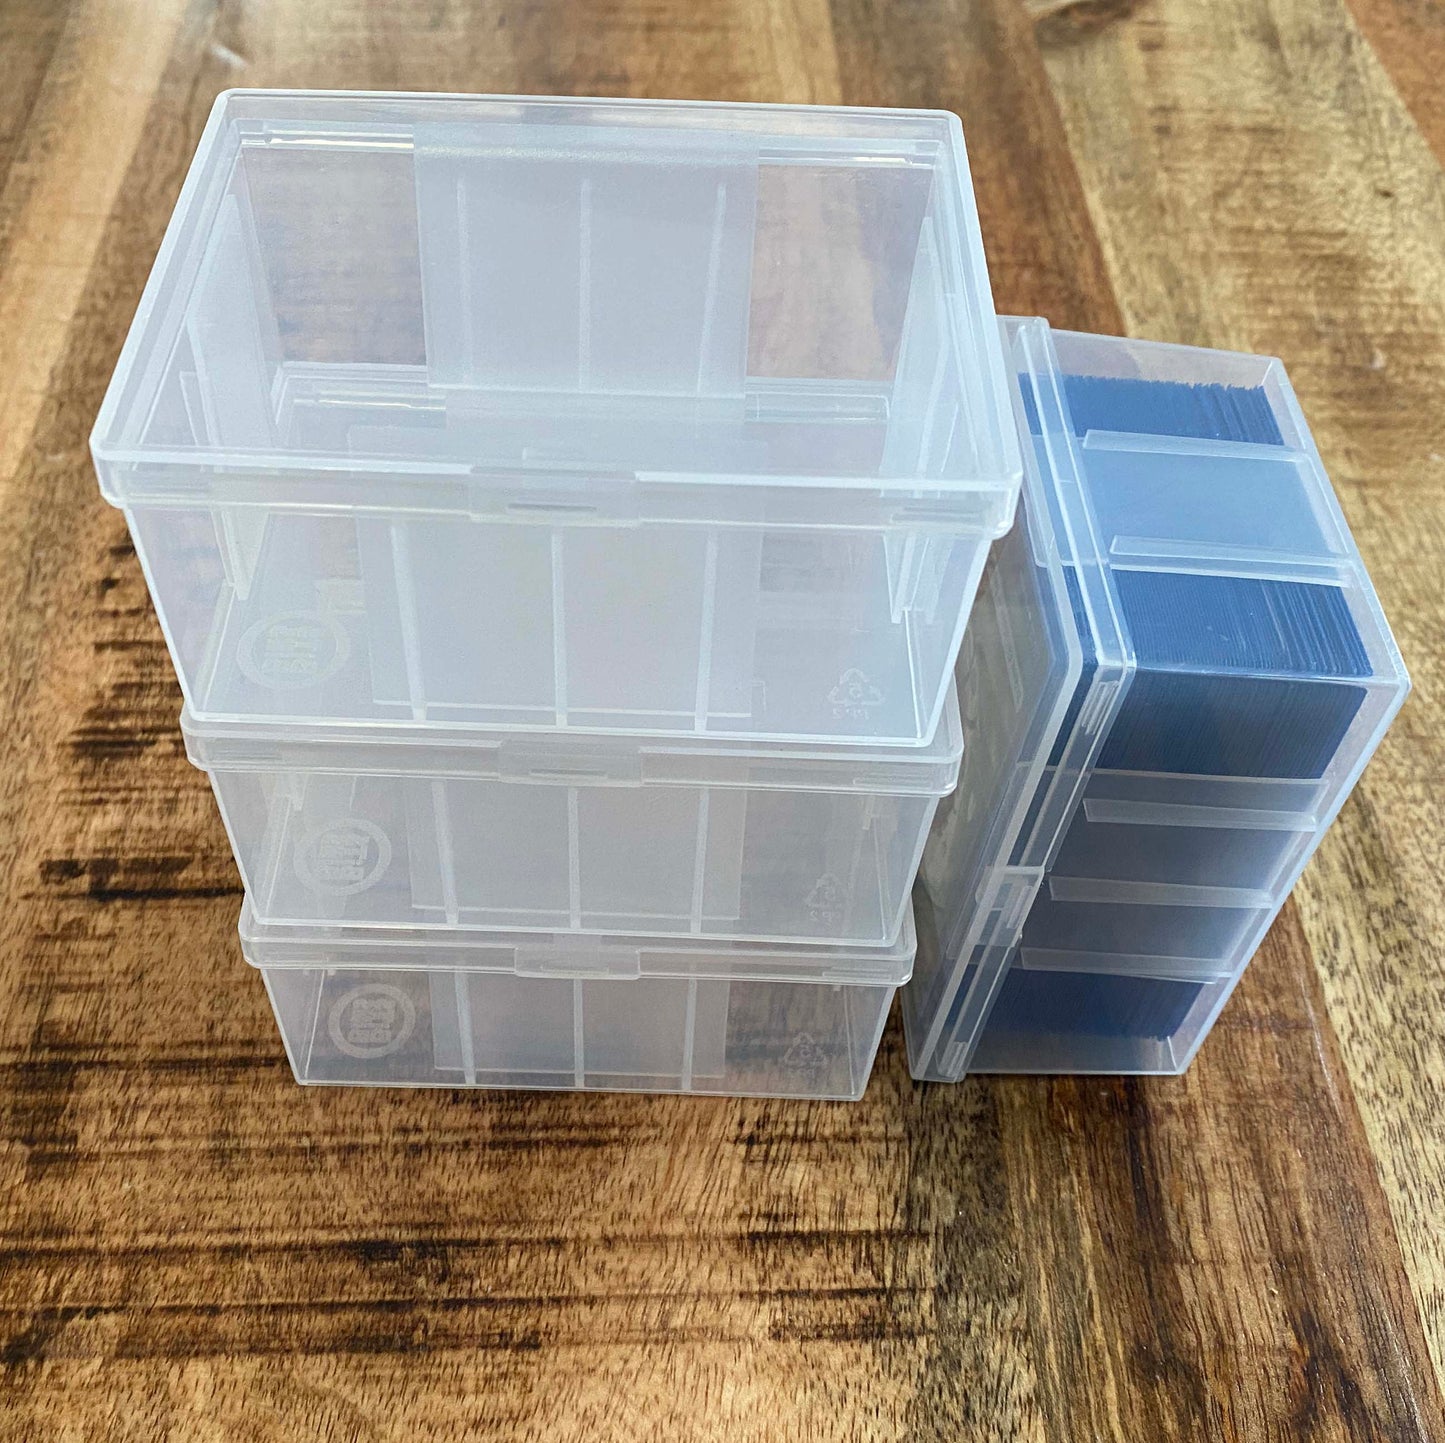 4 Pack or 8 Pack BitBins 100+ Card Box, Hold 75 Sleeved Card or 142 Un-sleeved, Snap Top, Shatterproof, Durable